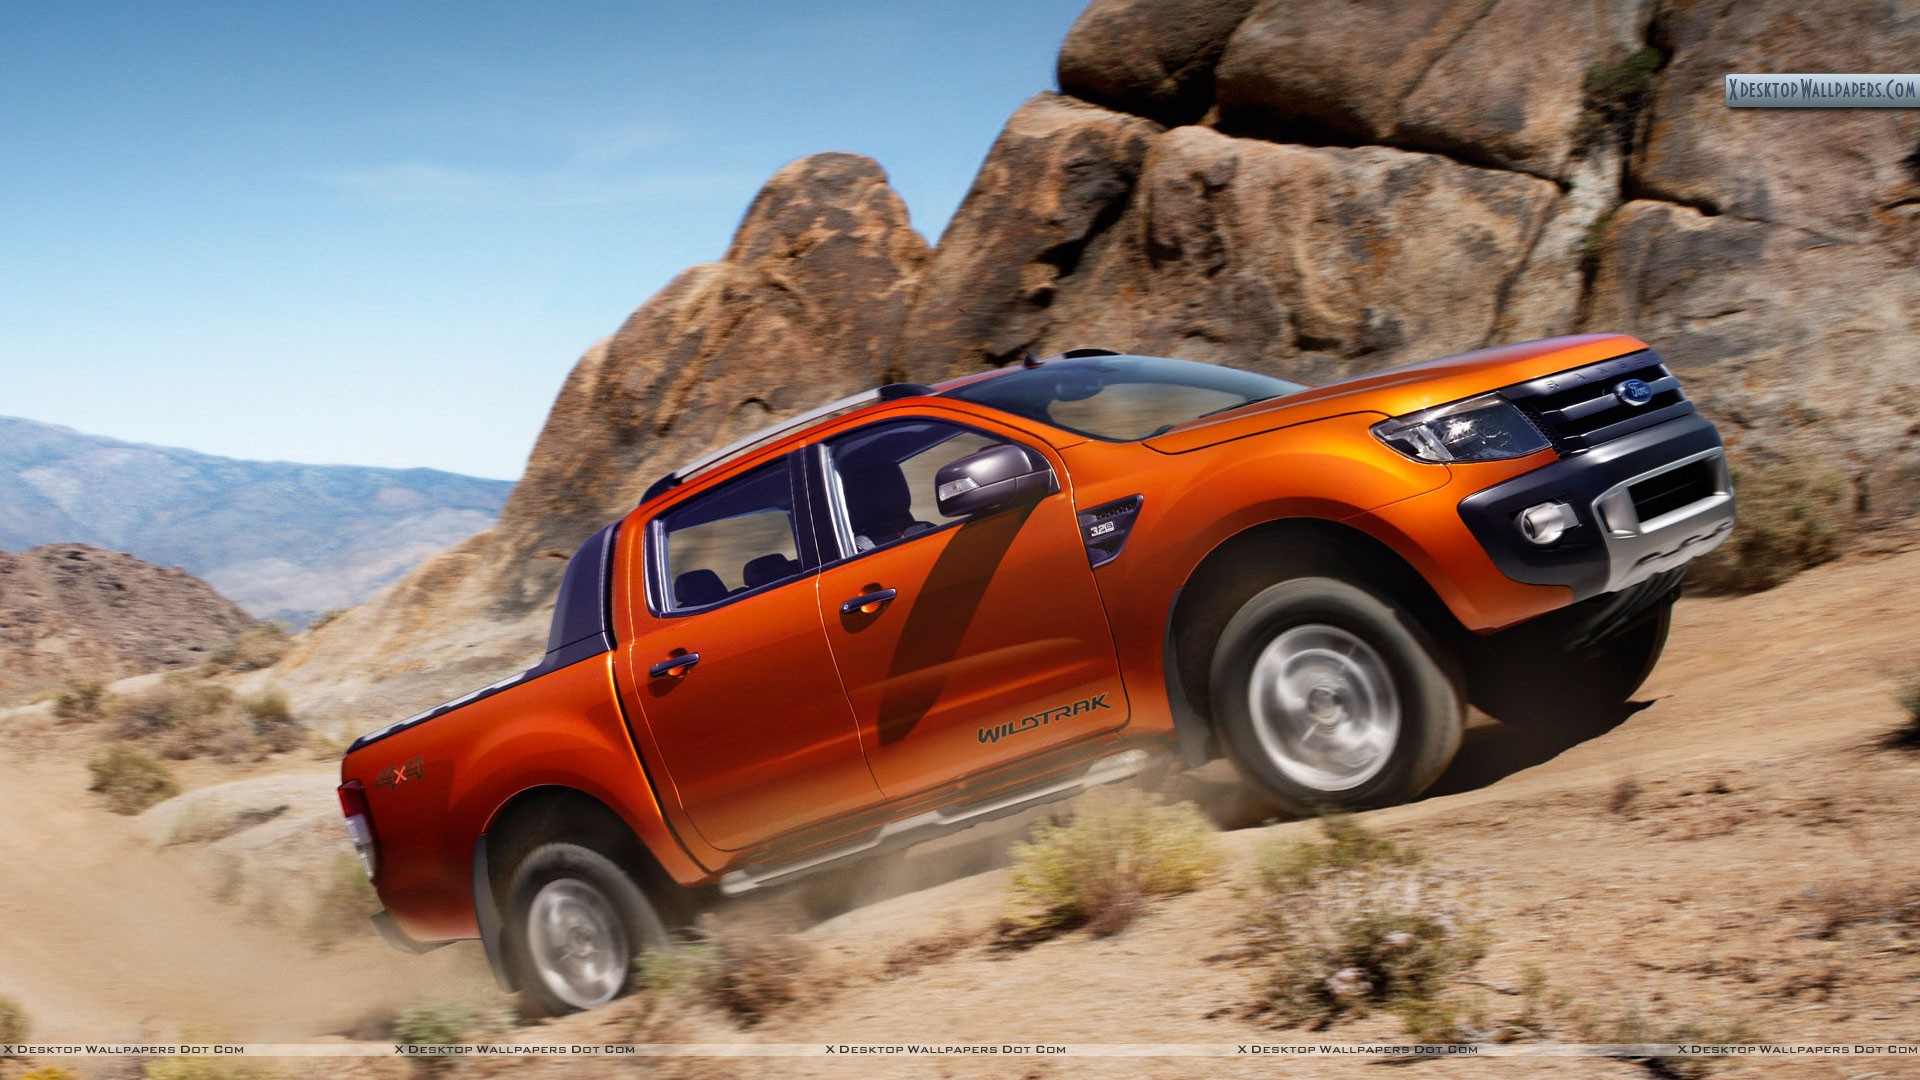 Ford Ranger Wallpaper Photos Image In HD